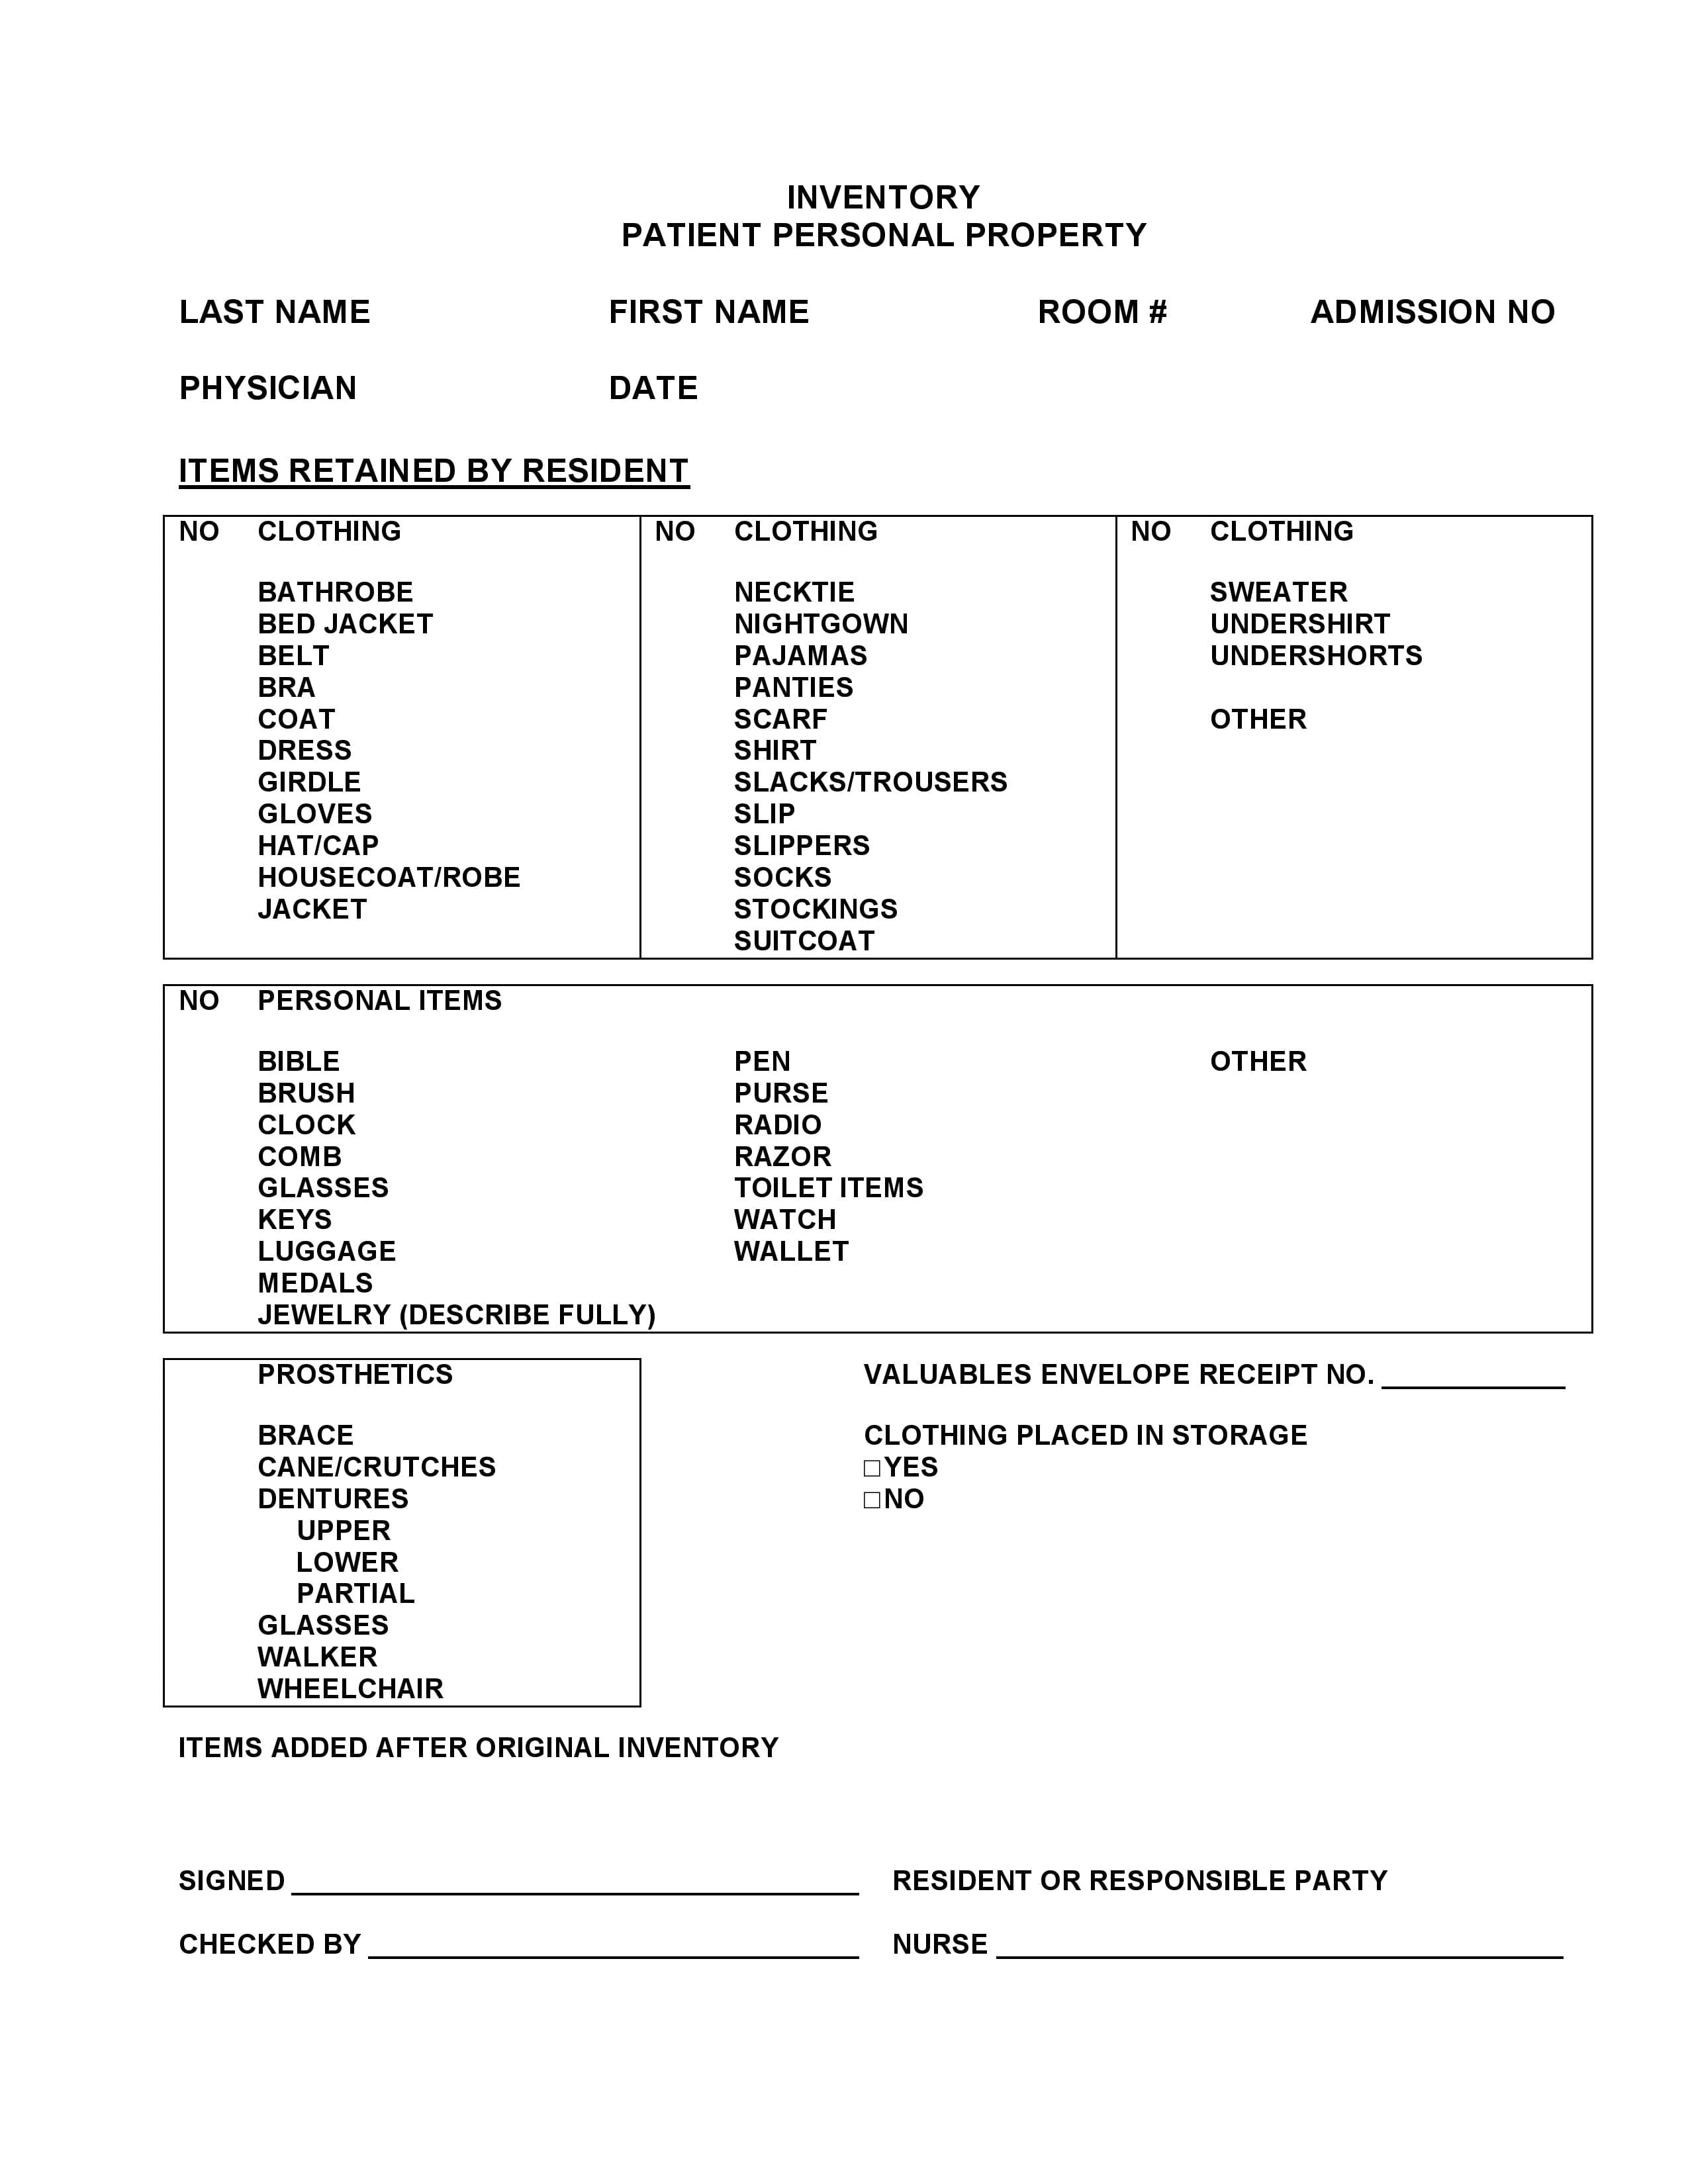 Free Inventory Patient Personal Property Form Pdf Template Form Download